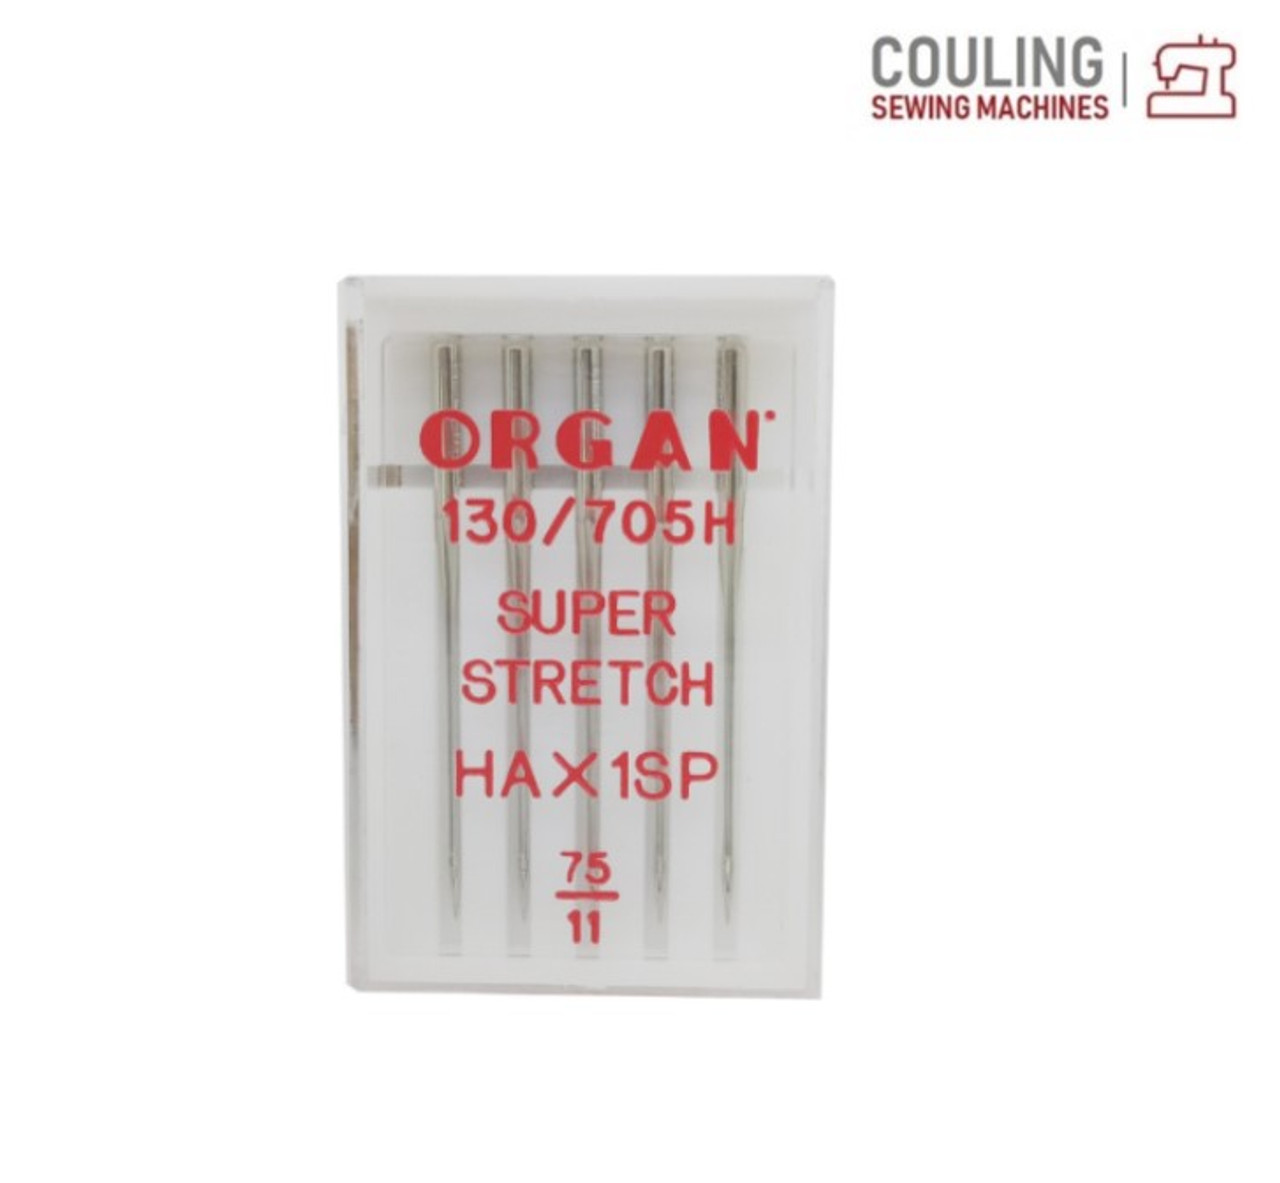 Organ Super Stretch HAX1SP Needles Size 75/11 for Overlockers and Sewing  Machines - Couling Sewing Machines